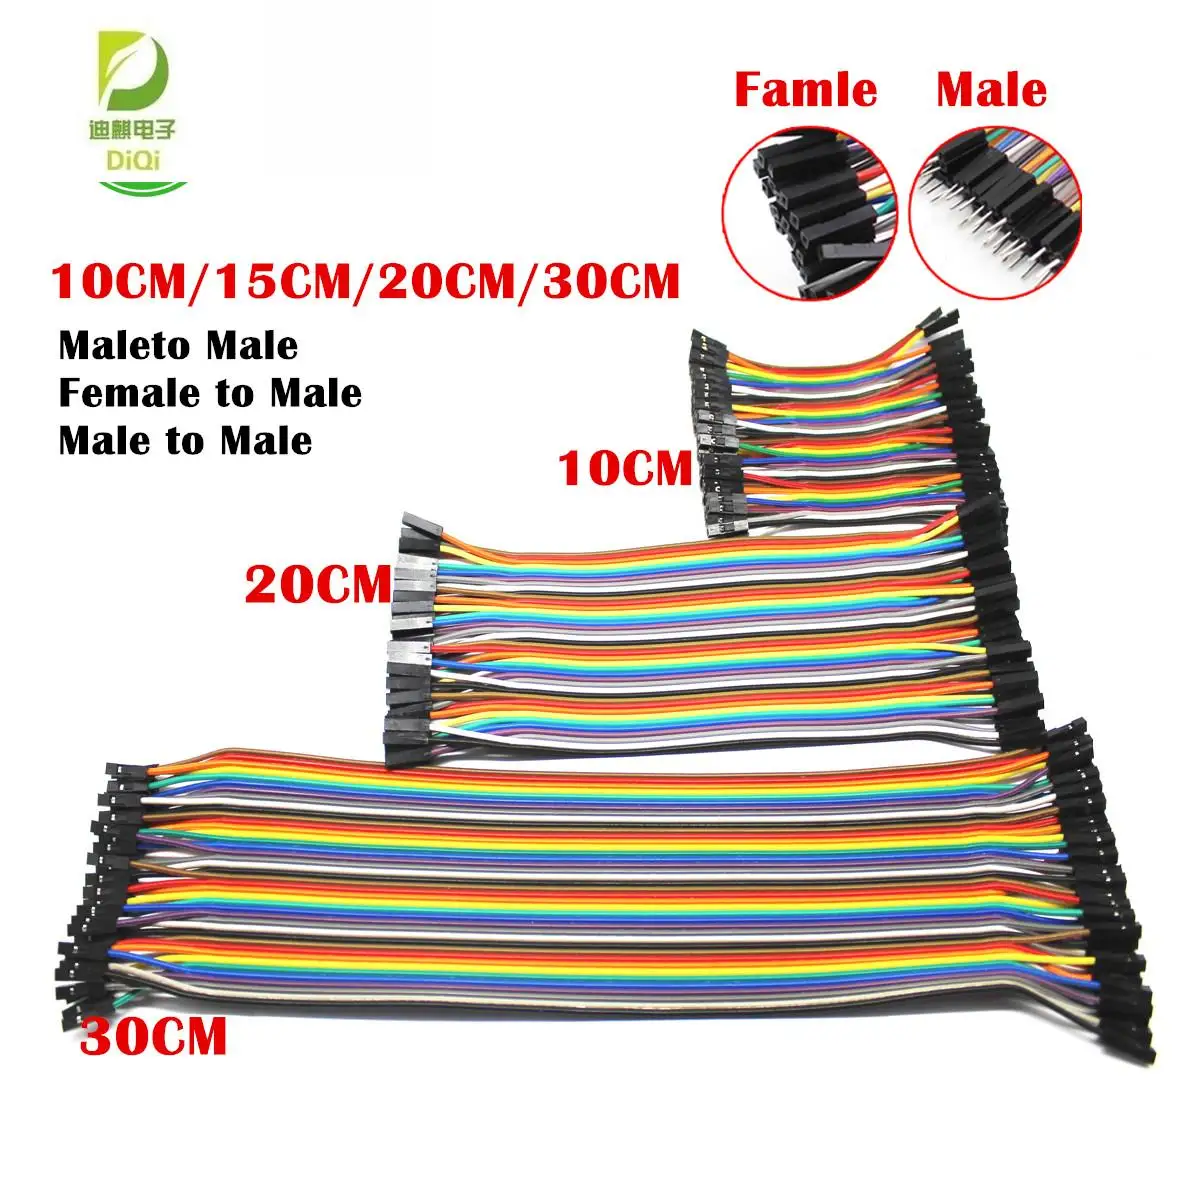 

40PIN 10CM 20CM 30CM Dupont Line Male to Male + Female to Male and Female to Female Jumper Dupont Wire Cable For PCB DIY KIT